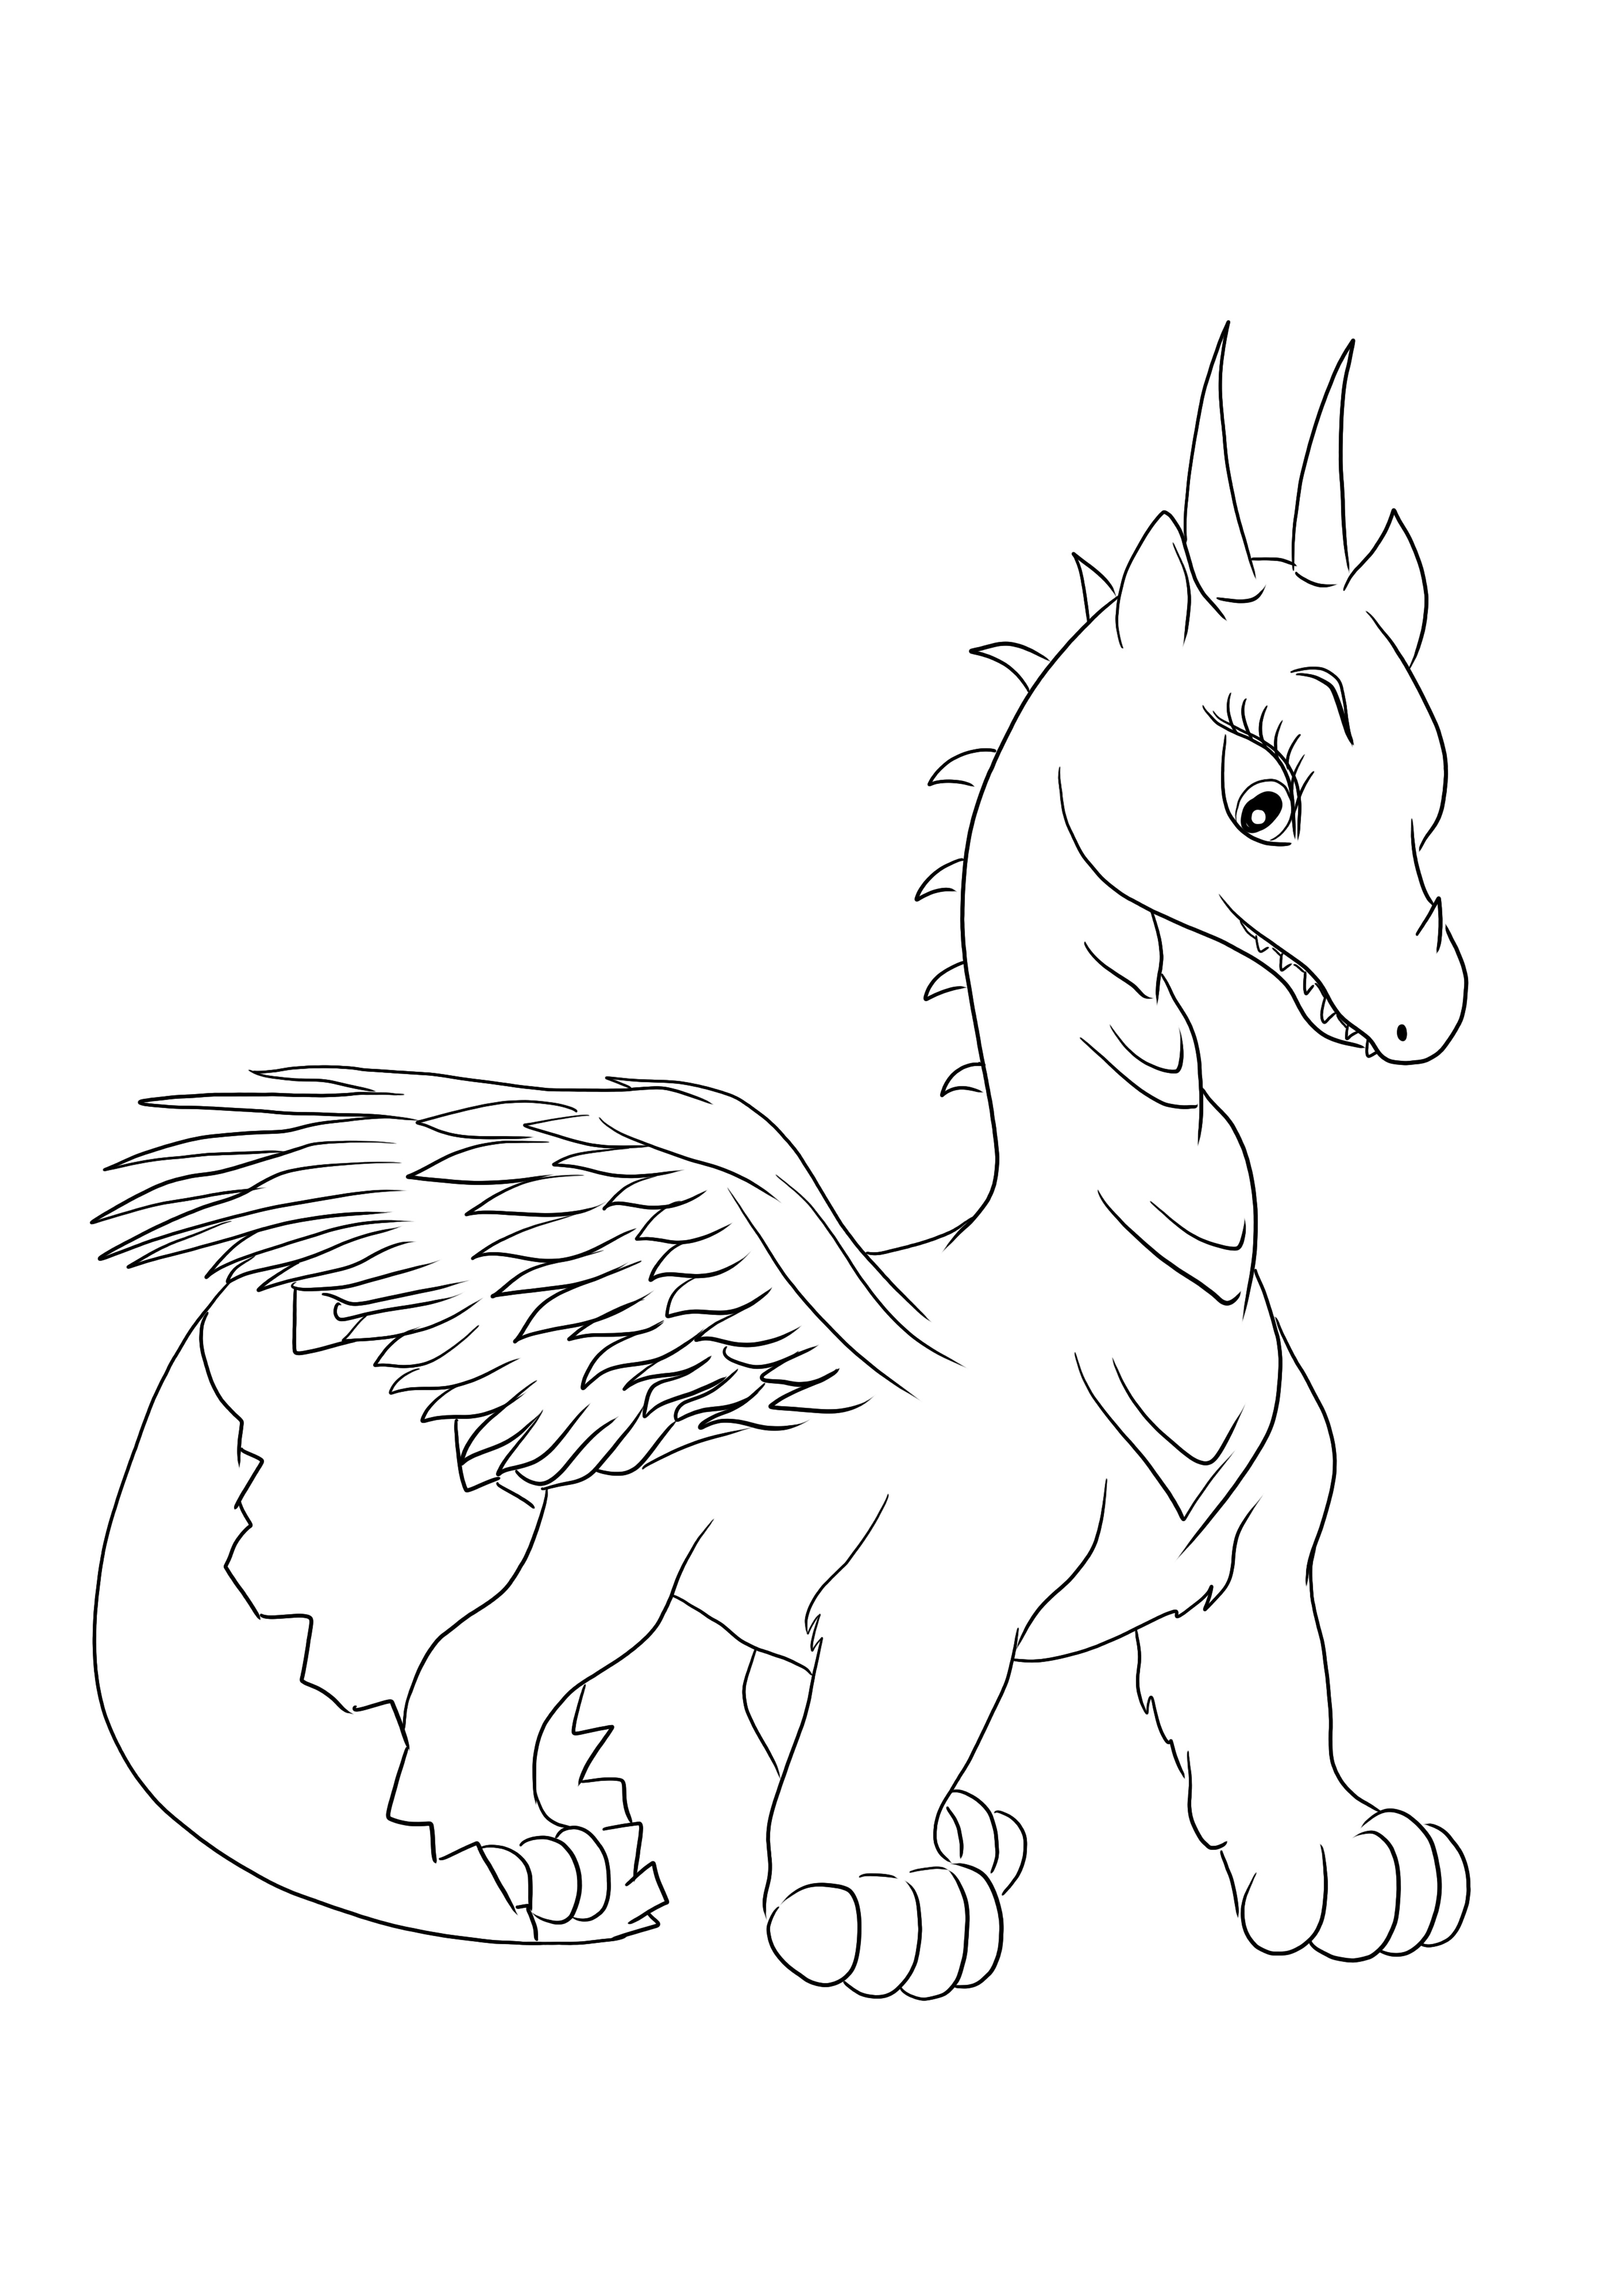 Cute Baby Dragon free printable coloring sheet to download and save for later for kids